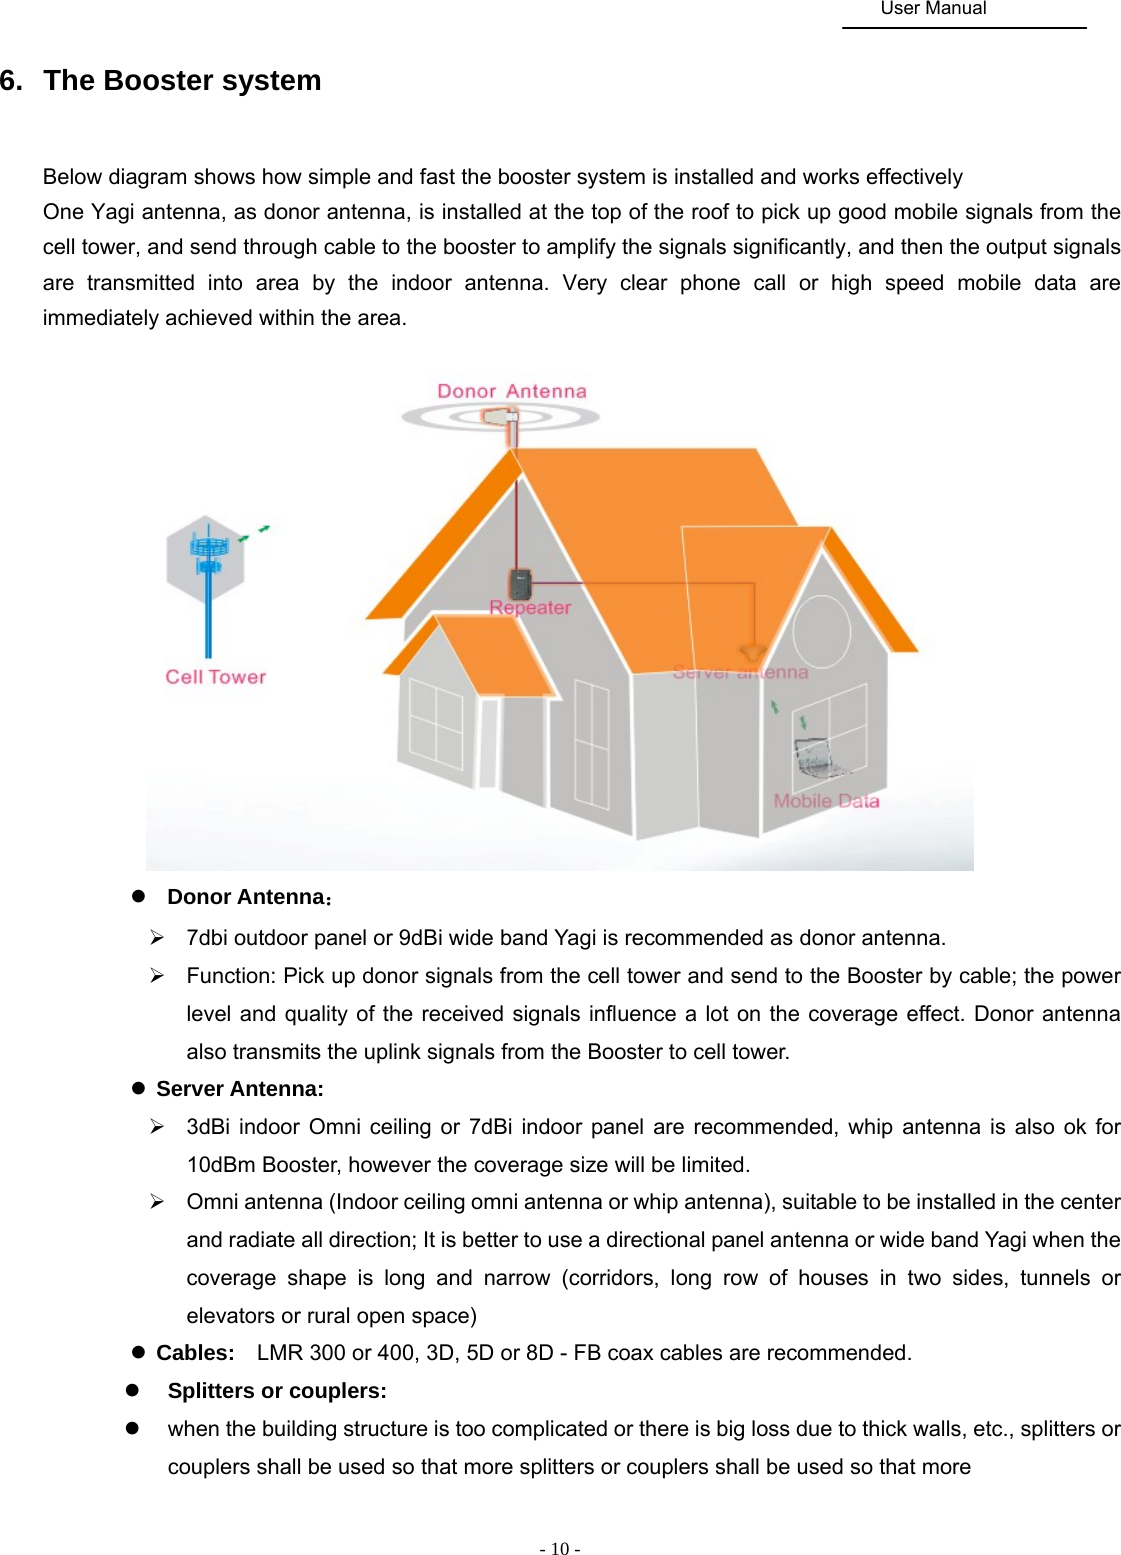                                                                                               User Manual  - 10 -   6.  The Booster system   Below diagram shows how simple and fast the booster system is installed and works effectively One Yagi antenna, as donor antenna, is installed at the top of the roof to pick up good mobile signals from the cell tower, and send through cable to the booster to amplify the signals significantly, and then the output signals are transmitted into area by the indoor antenna. Very clear phone call or high speed mobile data are immediately achieved within the area.   z  Donor Antenna： ¾  7dbi outdoor panel or 9dBi wide band Yagi is recommended as donor antenna. ¾  Function: Pick up donor signals from the cell tower and send to the Booster by cable; the power level and quality of the received signals influence a lot on the coverage effect. Donor antenna also transmits the uplink signals from the Booster to cell tower. z Server Antenna: ¾  3dBi indoor Omni ceiling or 7dBi indoor panel are recommended, whip antenna is also ok for 10dBm Booster, however the coverage size will be limited. ¾  Omni antenna (Indoor ceiling omni antenna or whip antenna), suitable to be installed in the center and radiate all direction; It is better to use a directional panel antenna or wide band Yagi when the coverage shape is long and narrow (corridors, long row of houses in two sides, tunnels or elevators or rural open space) z Cables:    LMR 300 or 400, 3D, 5D or 8D - FB coax cables are recommended. z Splitters or couplers:   z  when the building structure is too complicated or there is big loss due to thick walls, etc., splitters or couplers shall be used so that more splitters or couplers shall be used so that more  